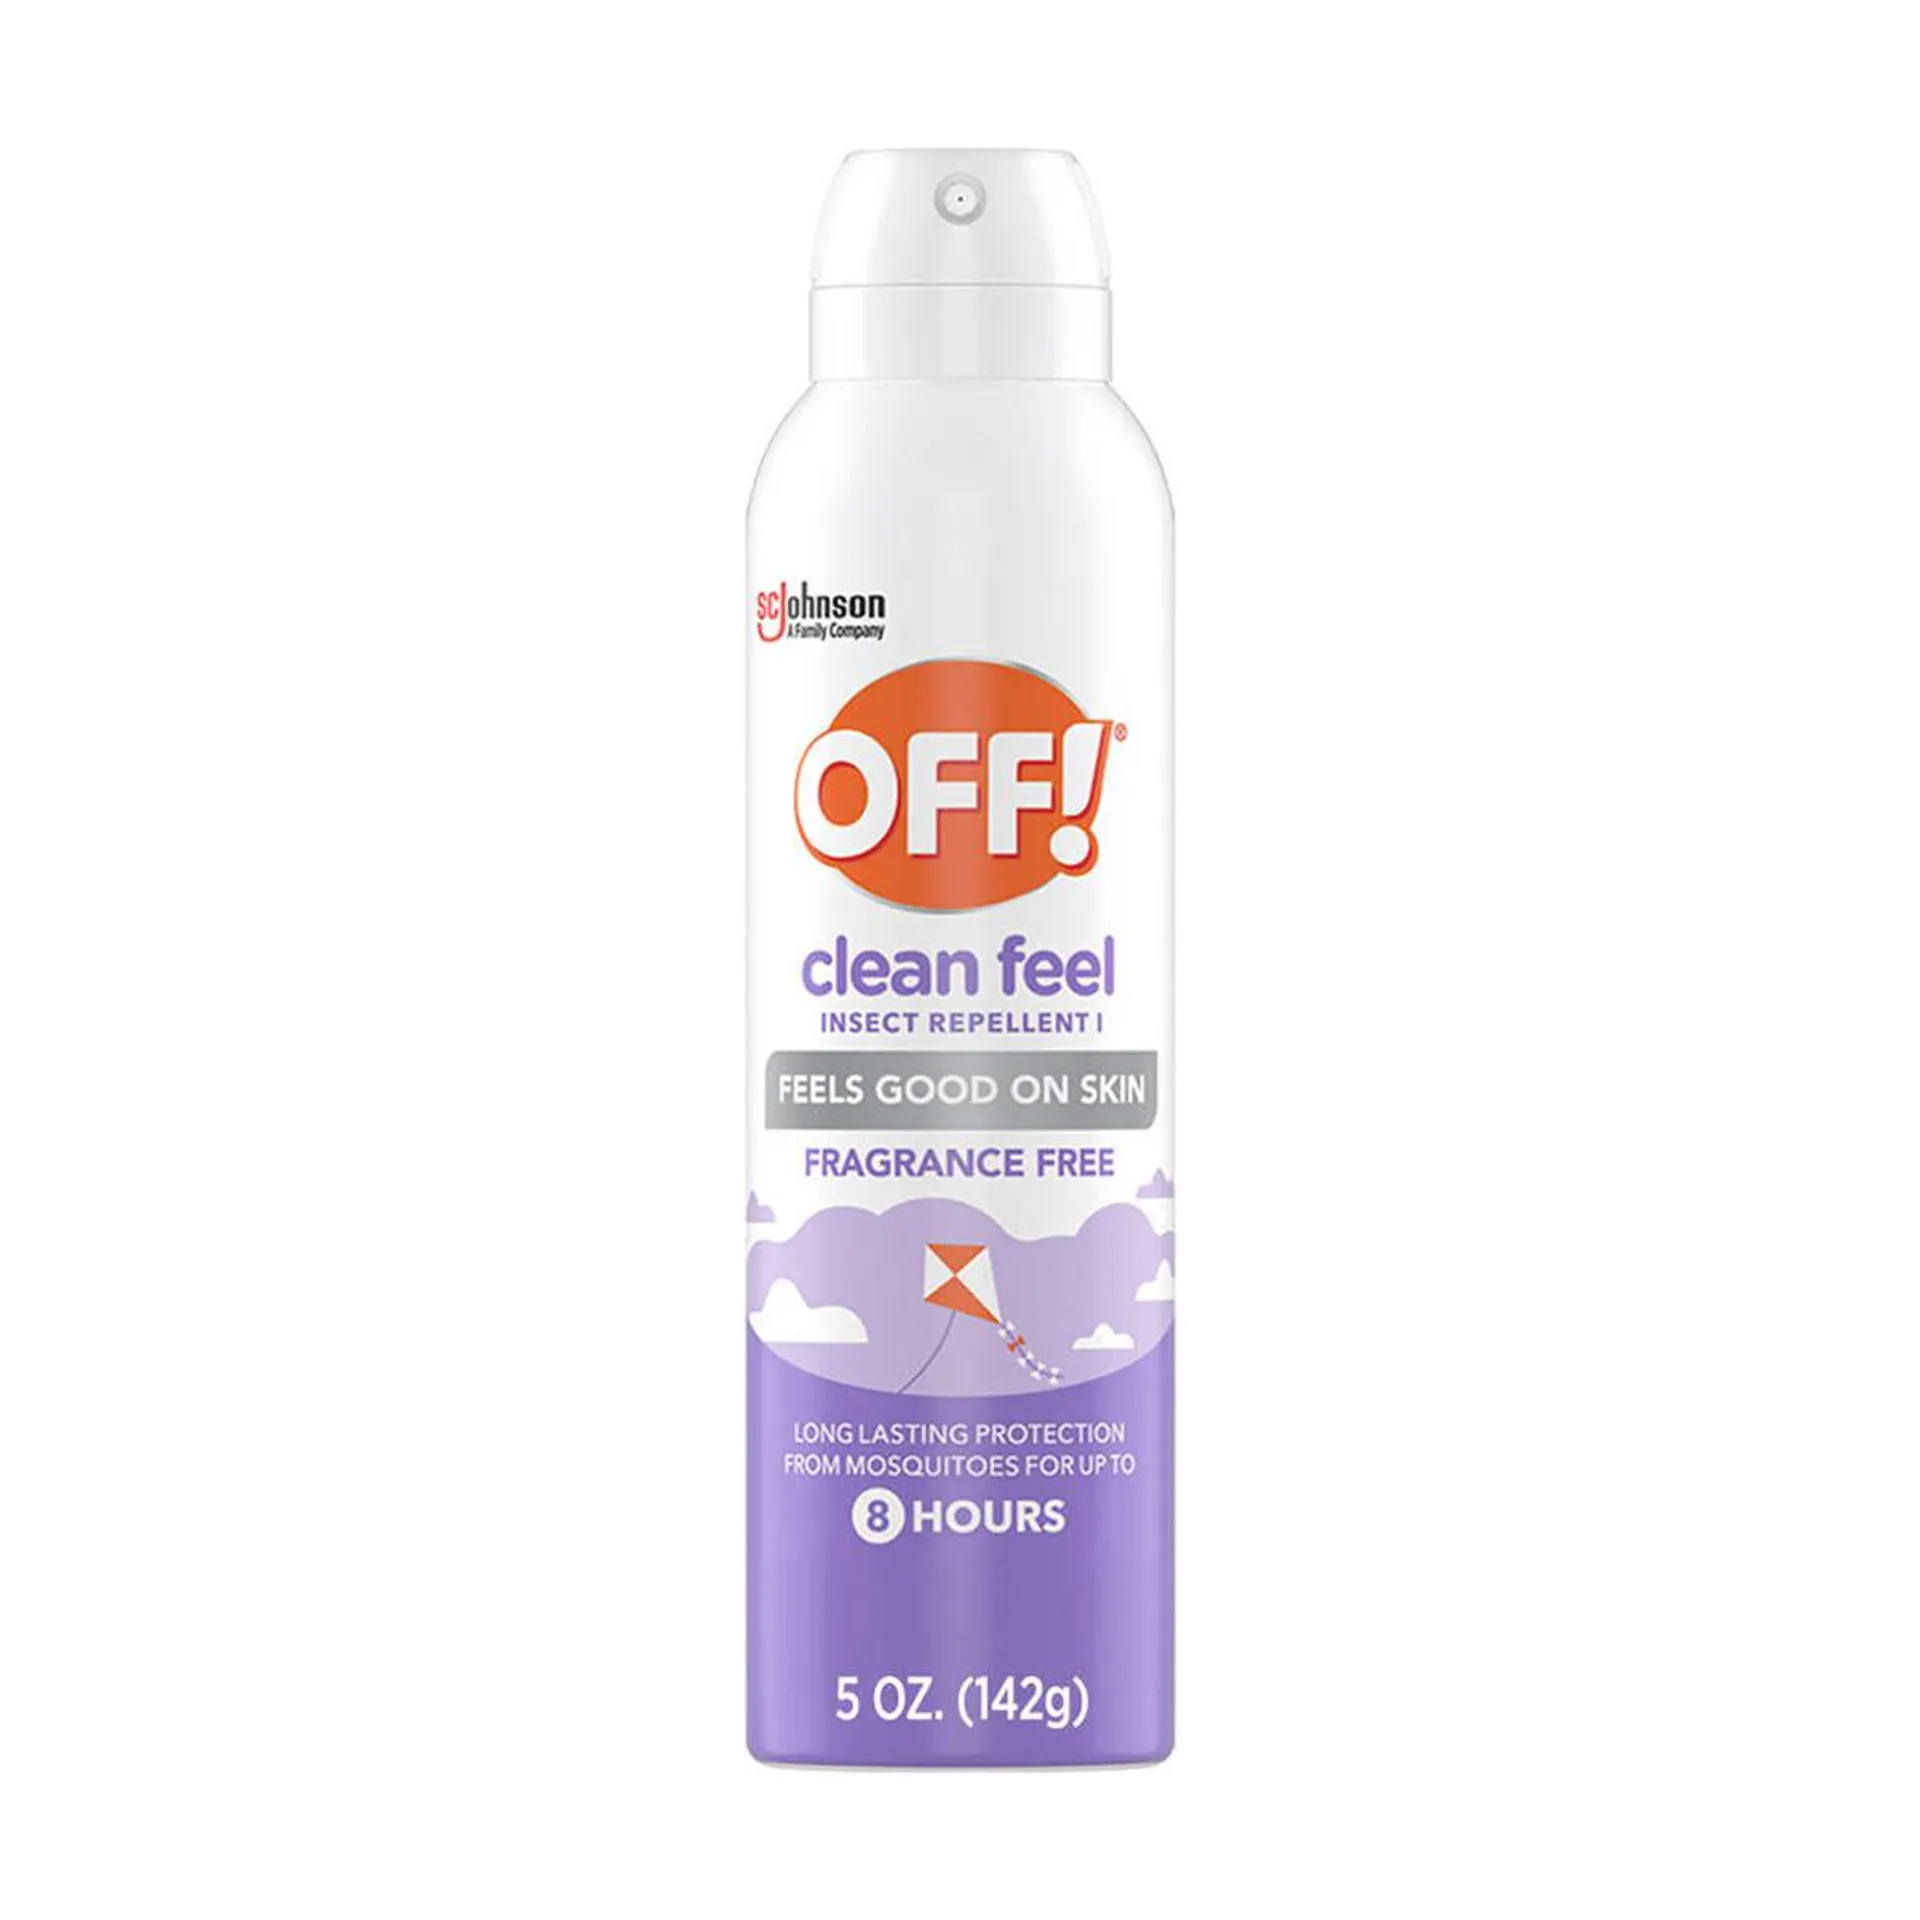 Off! Clean Feel Picaridin Mosquito Repellent, Bug Spray That Lasts Up To 8 Hours, 5 Oz